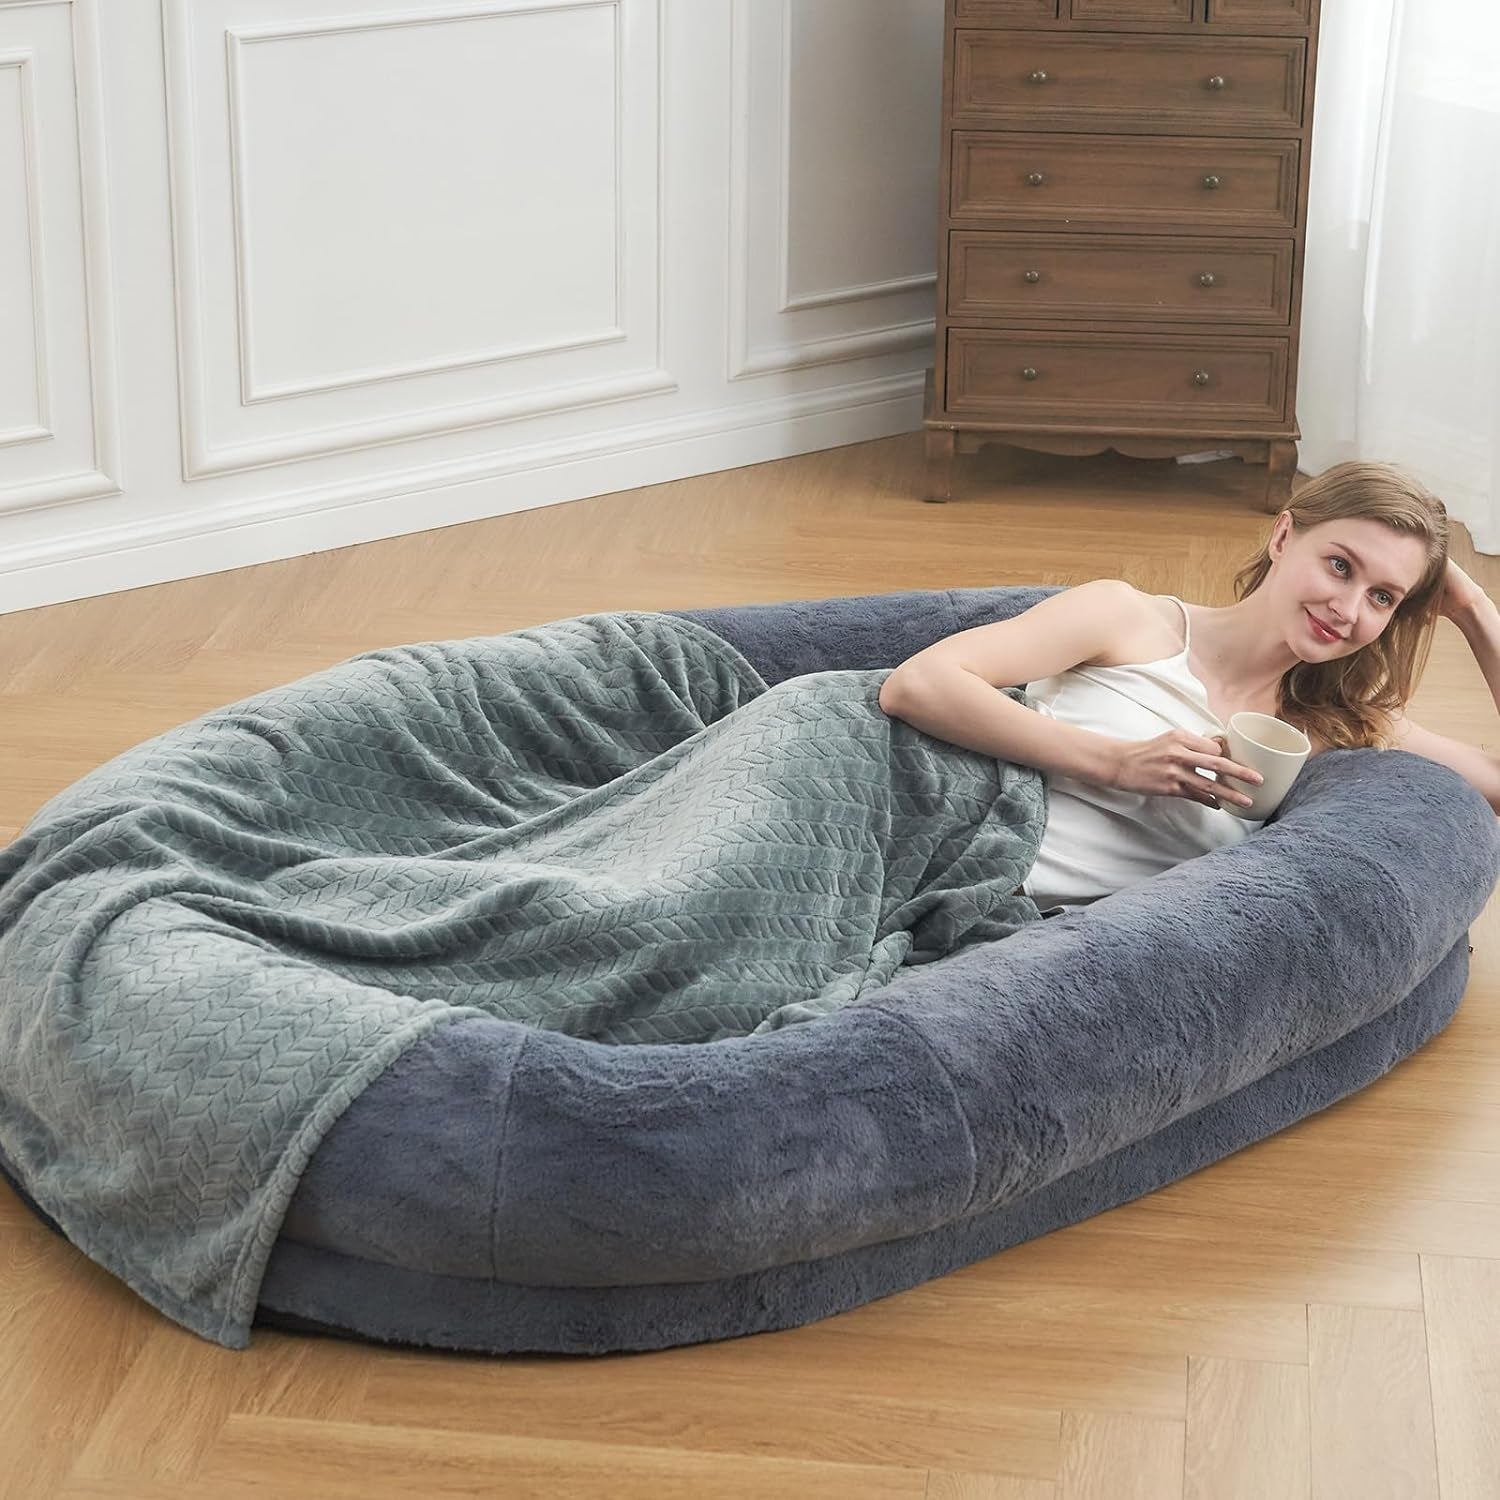 Giant Dog Bed for Humans – grey